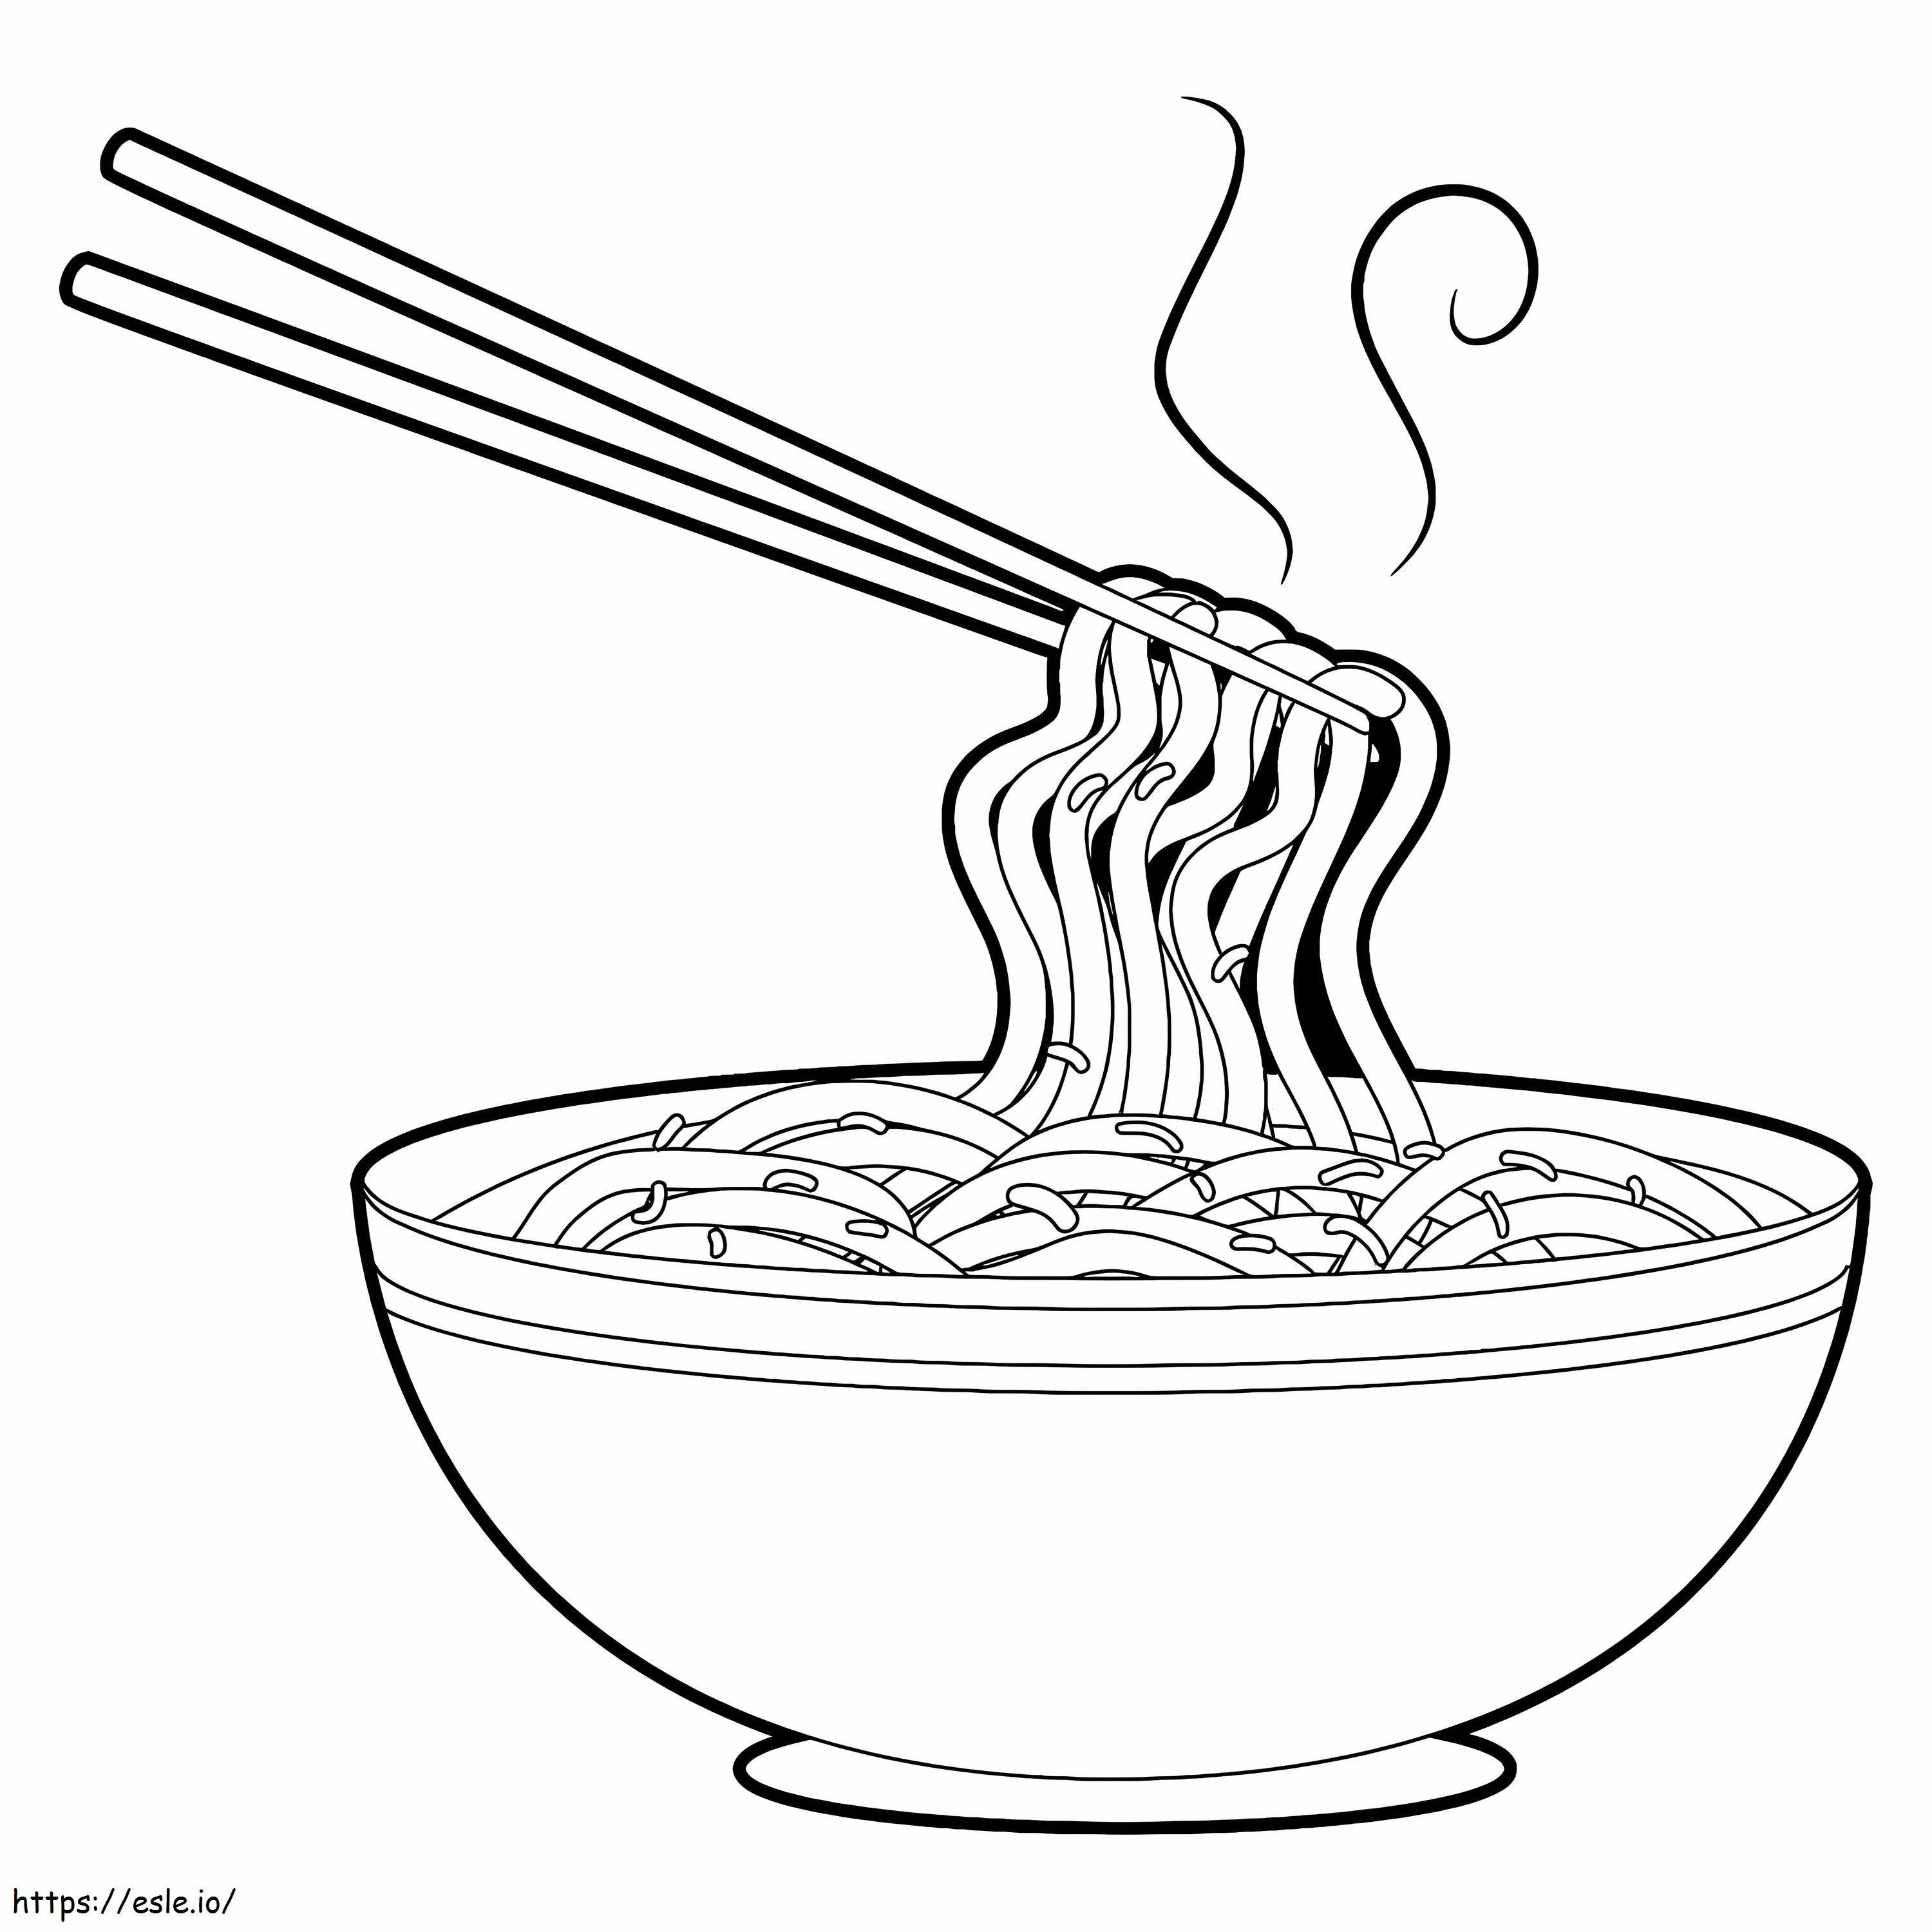 Noodles Made From Wheat coloring page